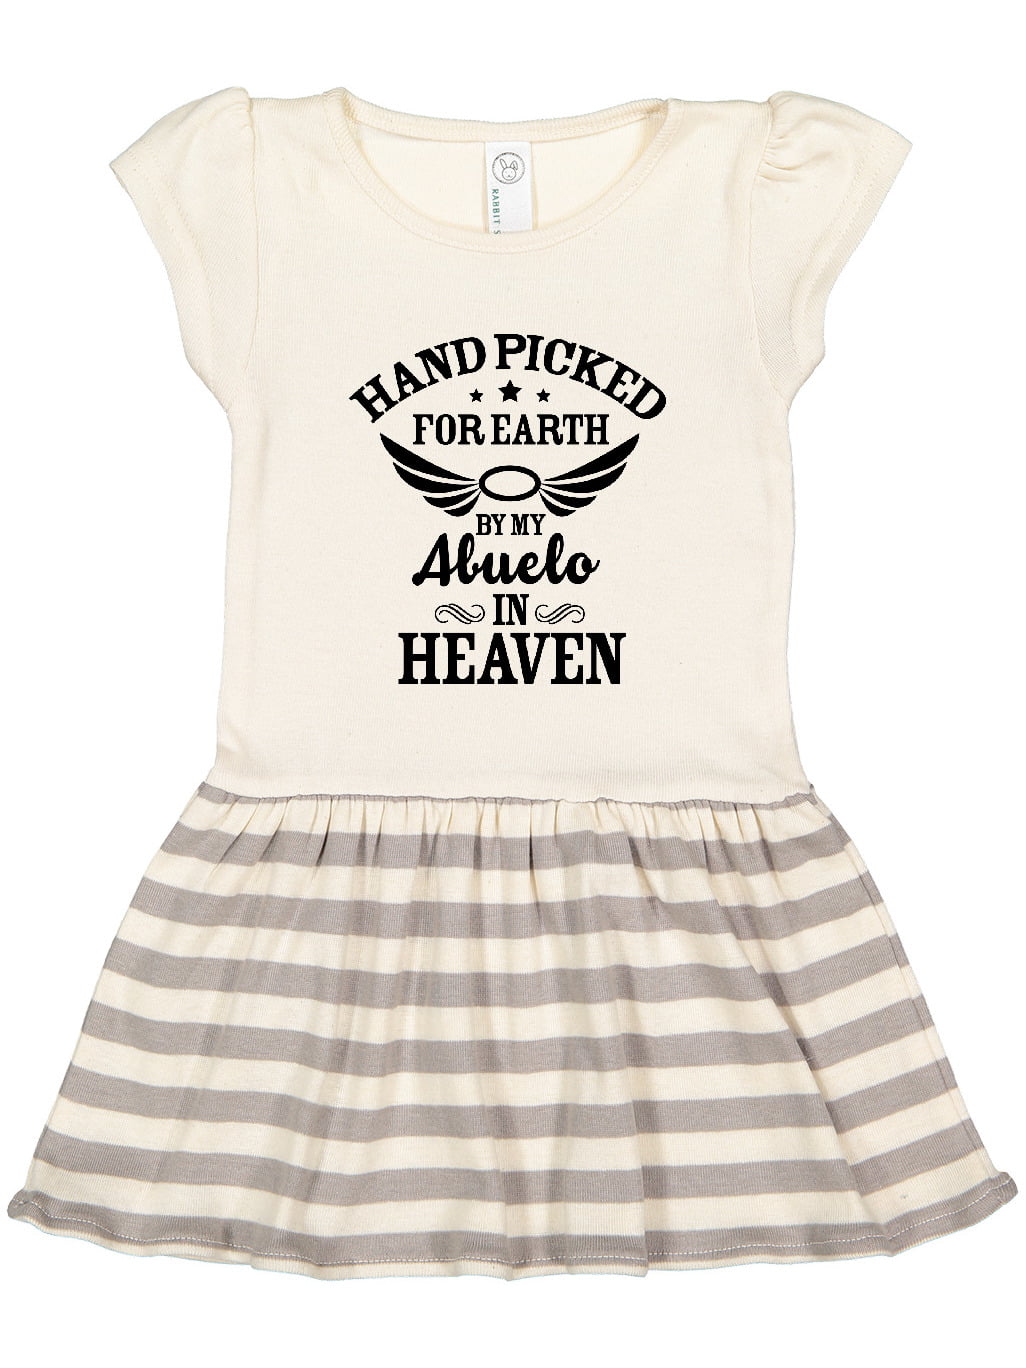 Wings with in Girl Dress Inktastic Gift Heaven By Abuelo Toddler Angel My for Earth Handpicked